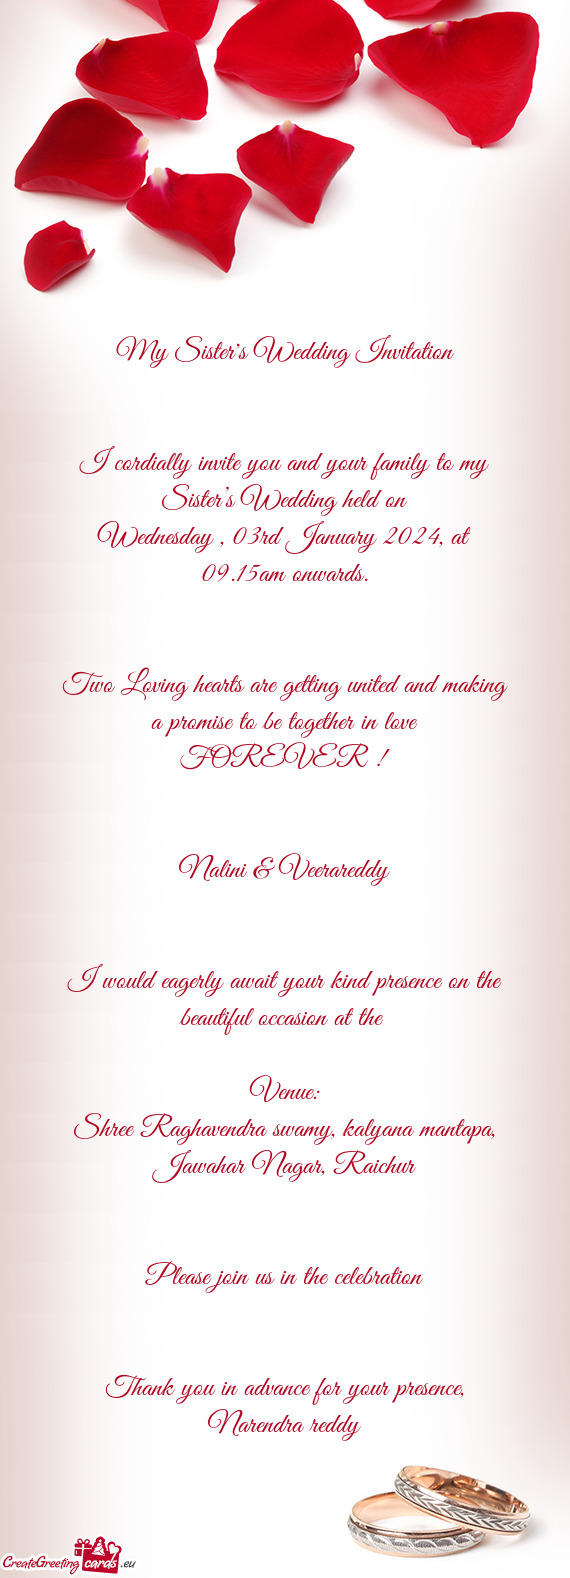 I cordially invite you and your family to my Sister’s Wedding held on